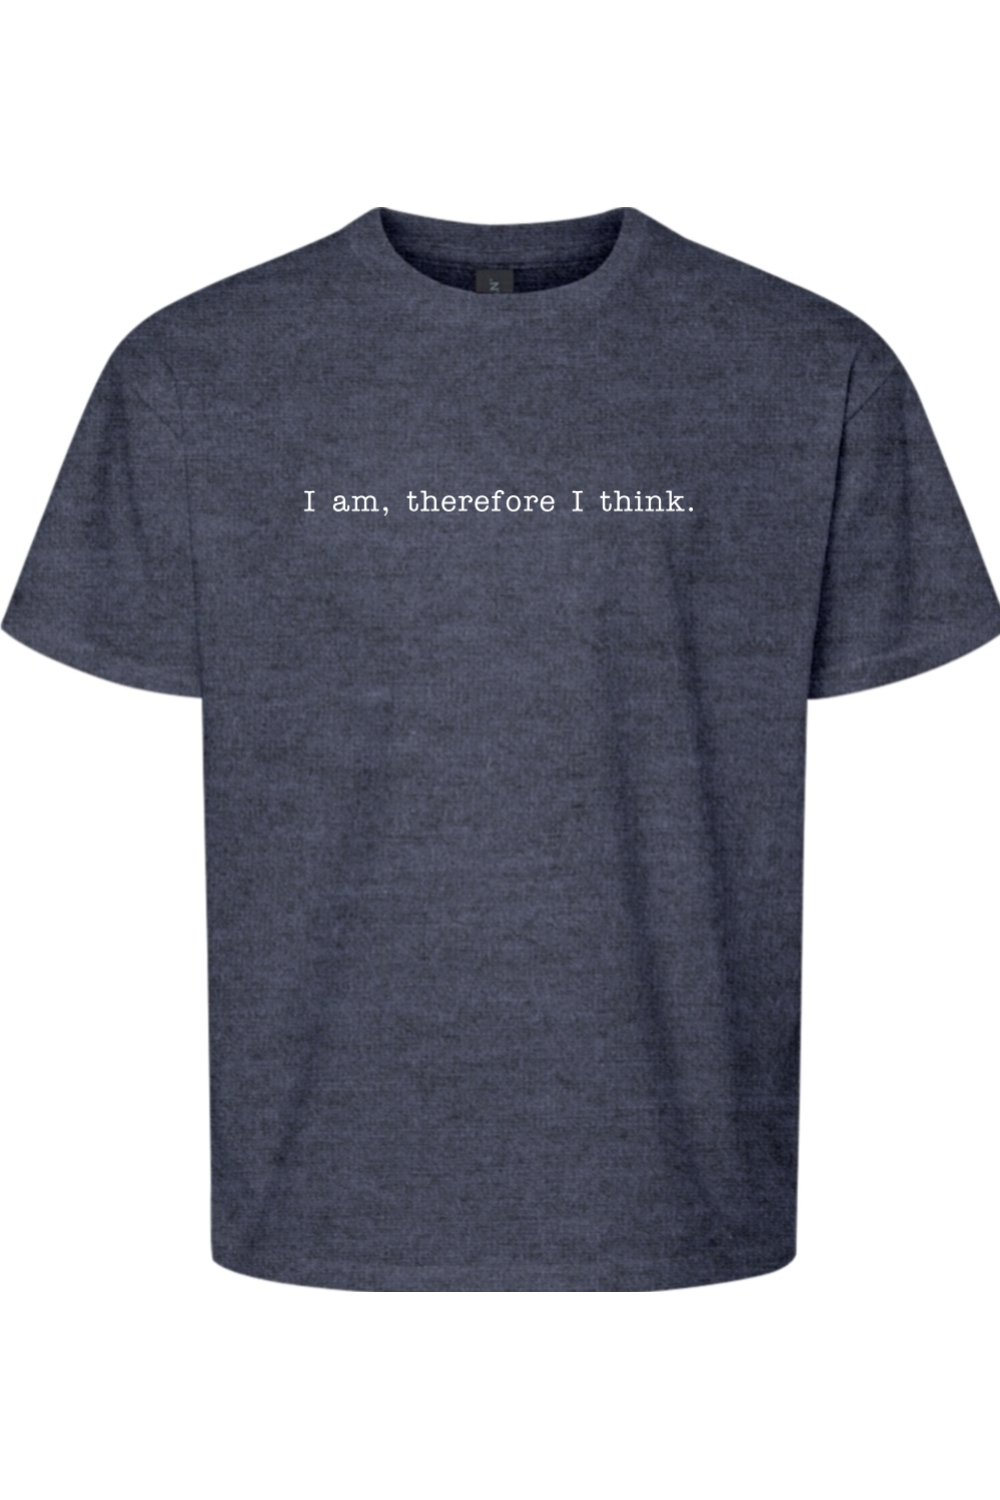 I am, Therefore I Think - Realism Philosophy Youth T-Shirt